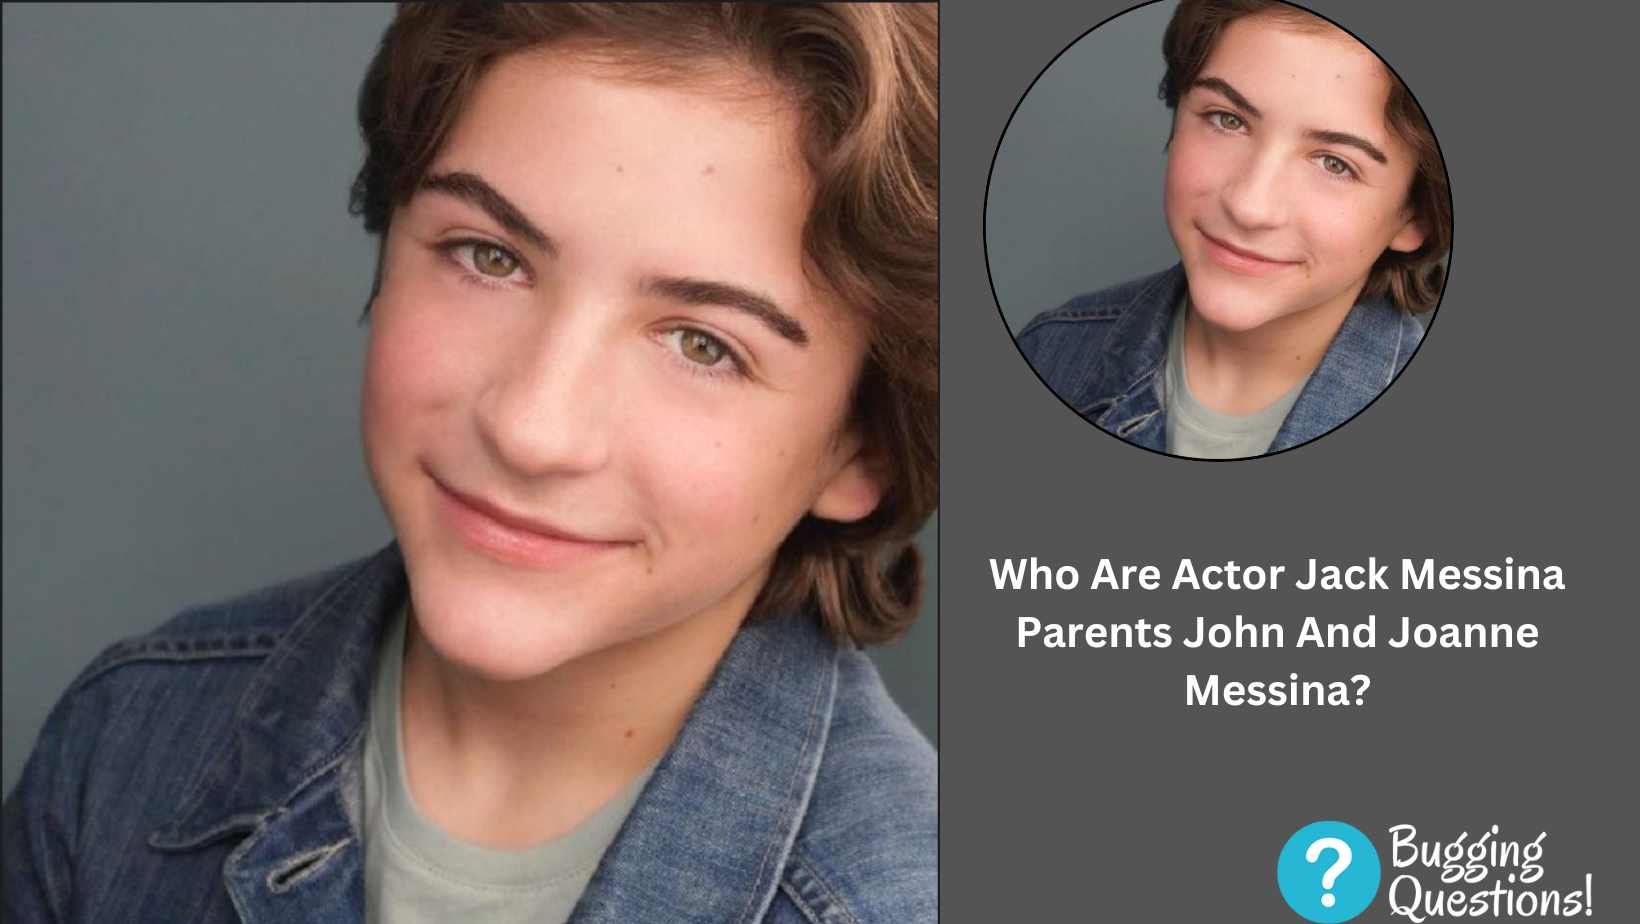 Who Are Actor Jack Messina Parents John And Joanne Messina?